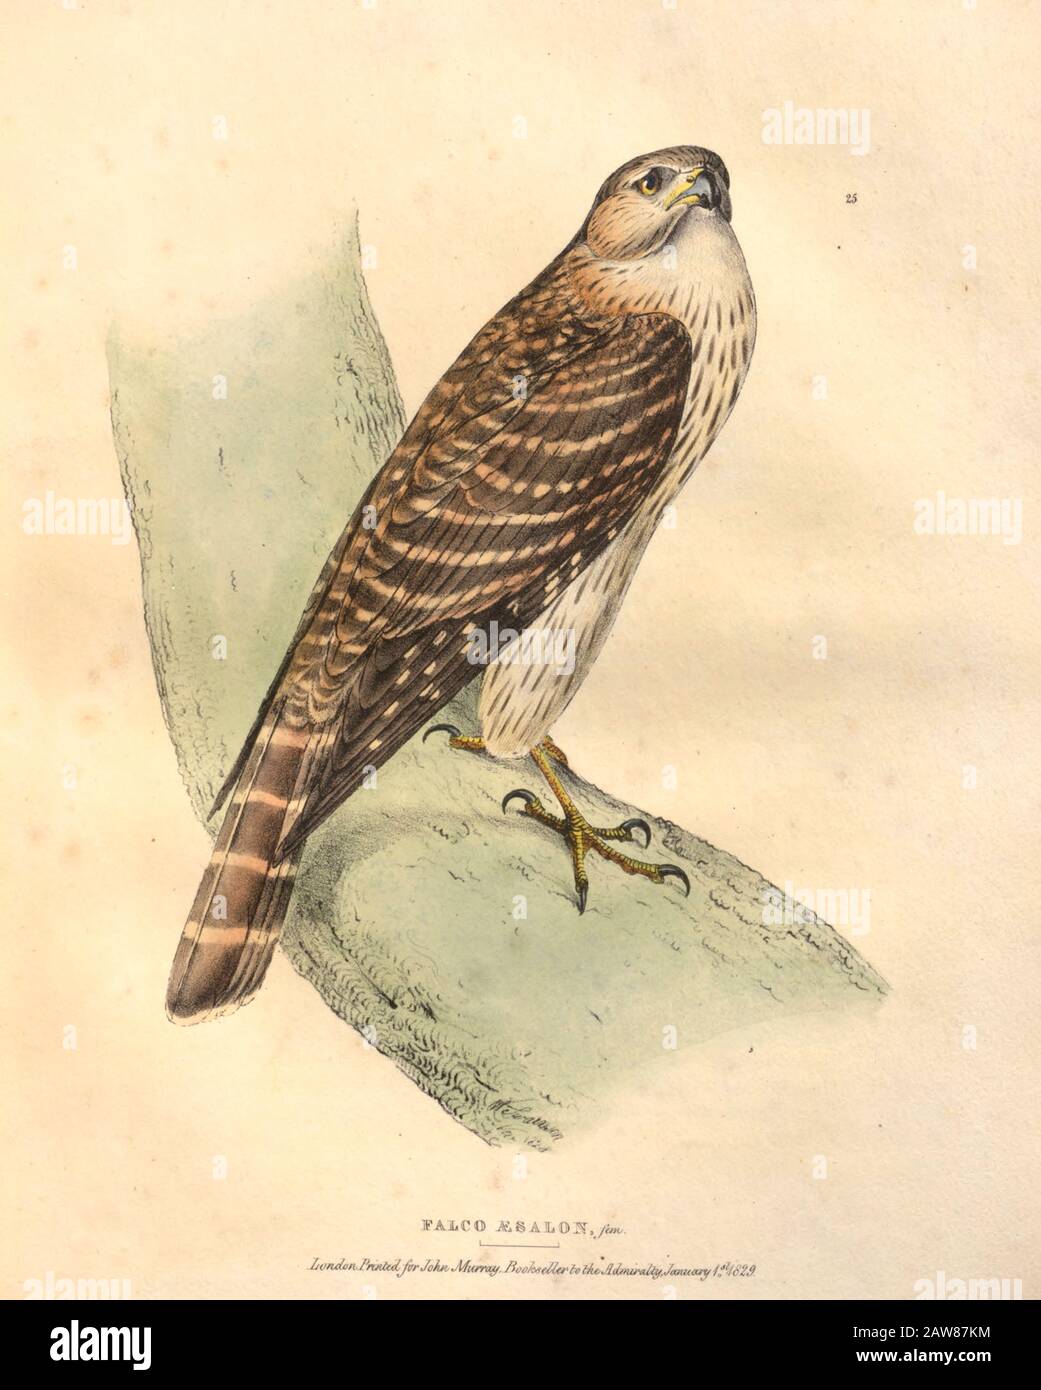 Merlin (Falco columbarius syn Falco aesalon) color plate of North American birds from Fauna boreali-americana; or, The zoology of the northern parts of British America, containing descriptions of the objects of natural history collected on the late northern land expeditions under command of Capt. Sir John Franklin by Richardson, John, Sir, 1787-1865 Published 1829 Stock Photo